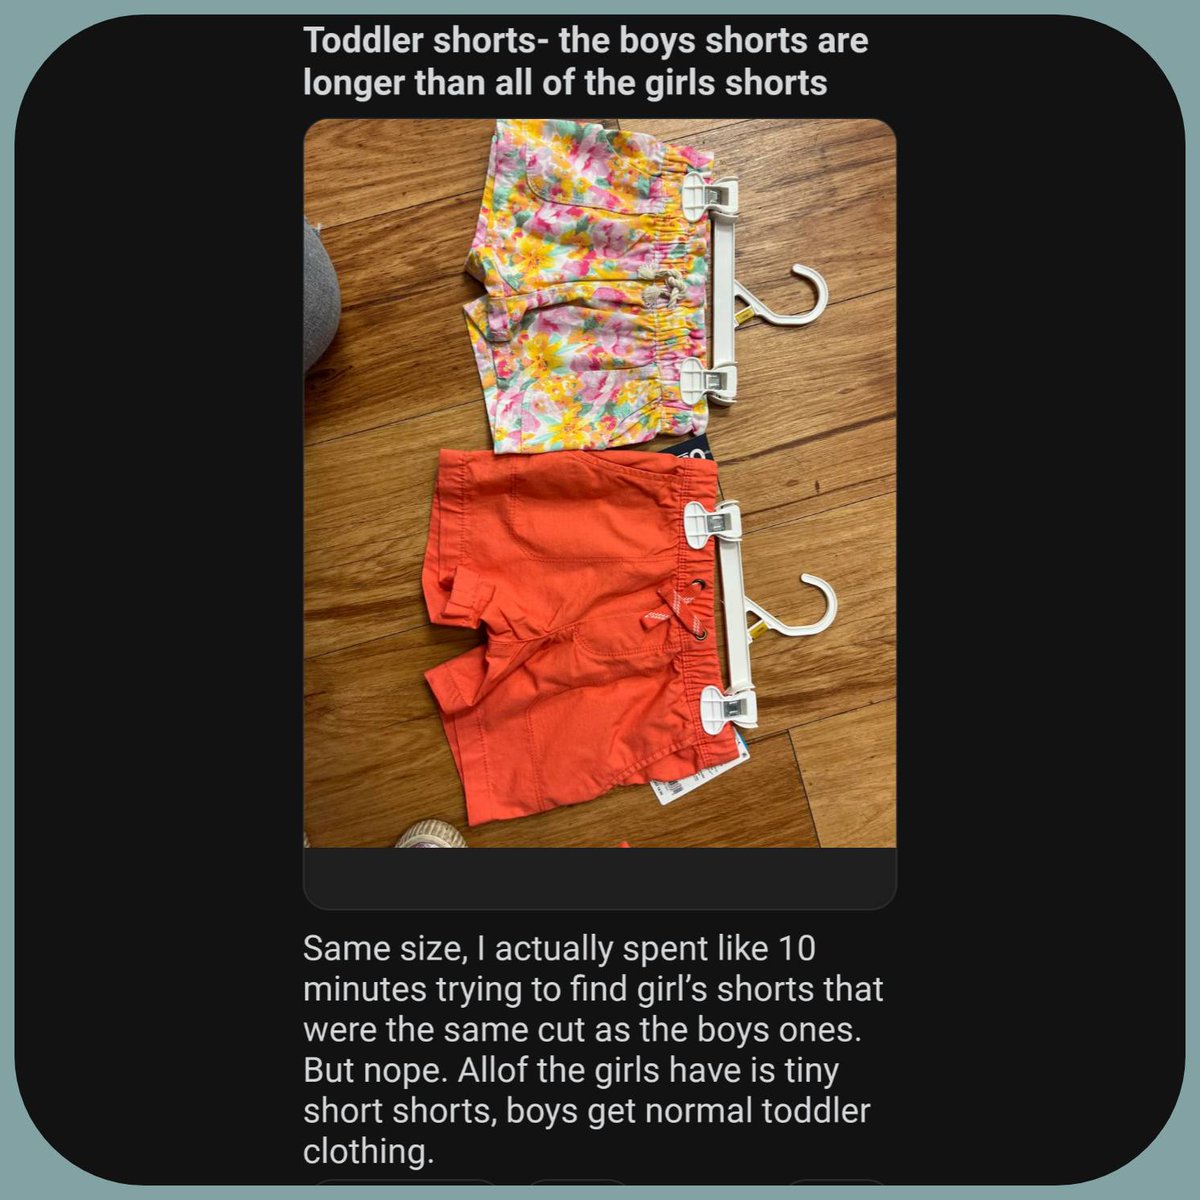 I personally noticed when shopping for a toddler the girls shirts were all crops and fitted tightly while the boy ones of the same brand and age were looser and more relaxed making it easier to play and move.